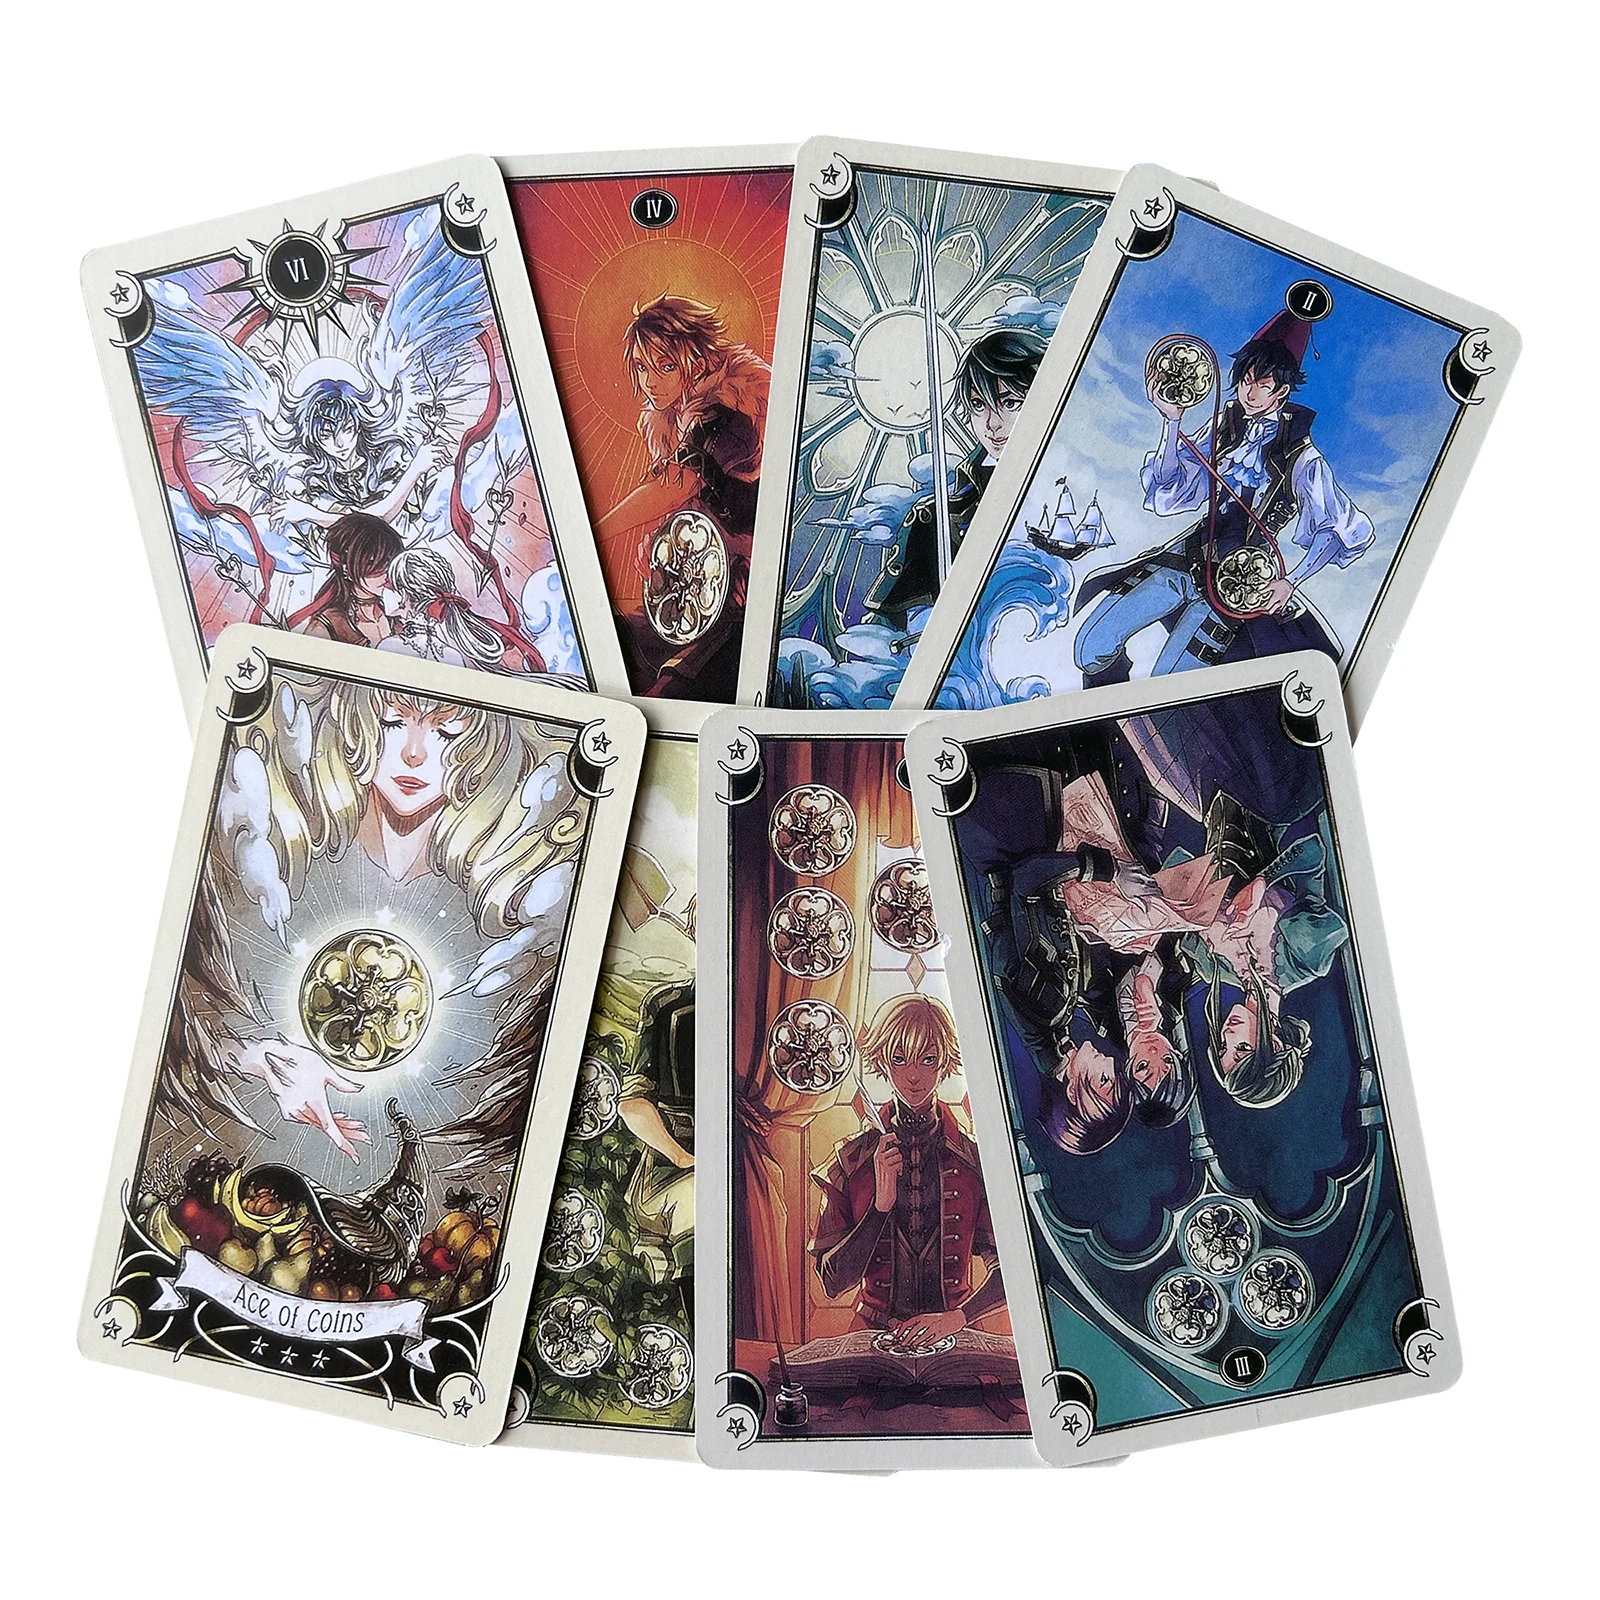 Hot Sell Tarot Cards 12x7 Board Game for Divination Personal Use Tarot Deck Party Games Full English Table Game Outdoor Camping. aluminum alloy tactical outdoor pen high hardness personal self defense anti skid military survival tactical signature pen autom